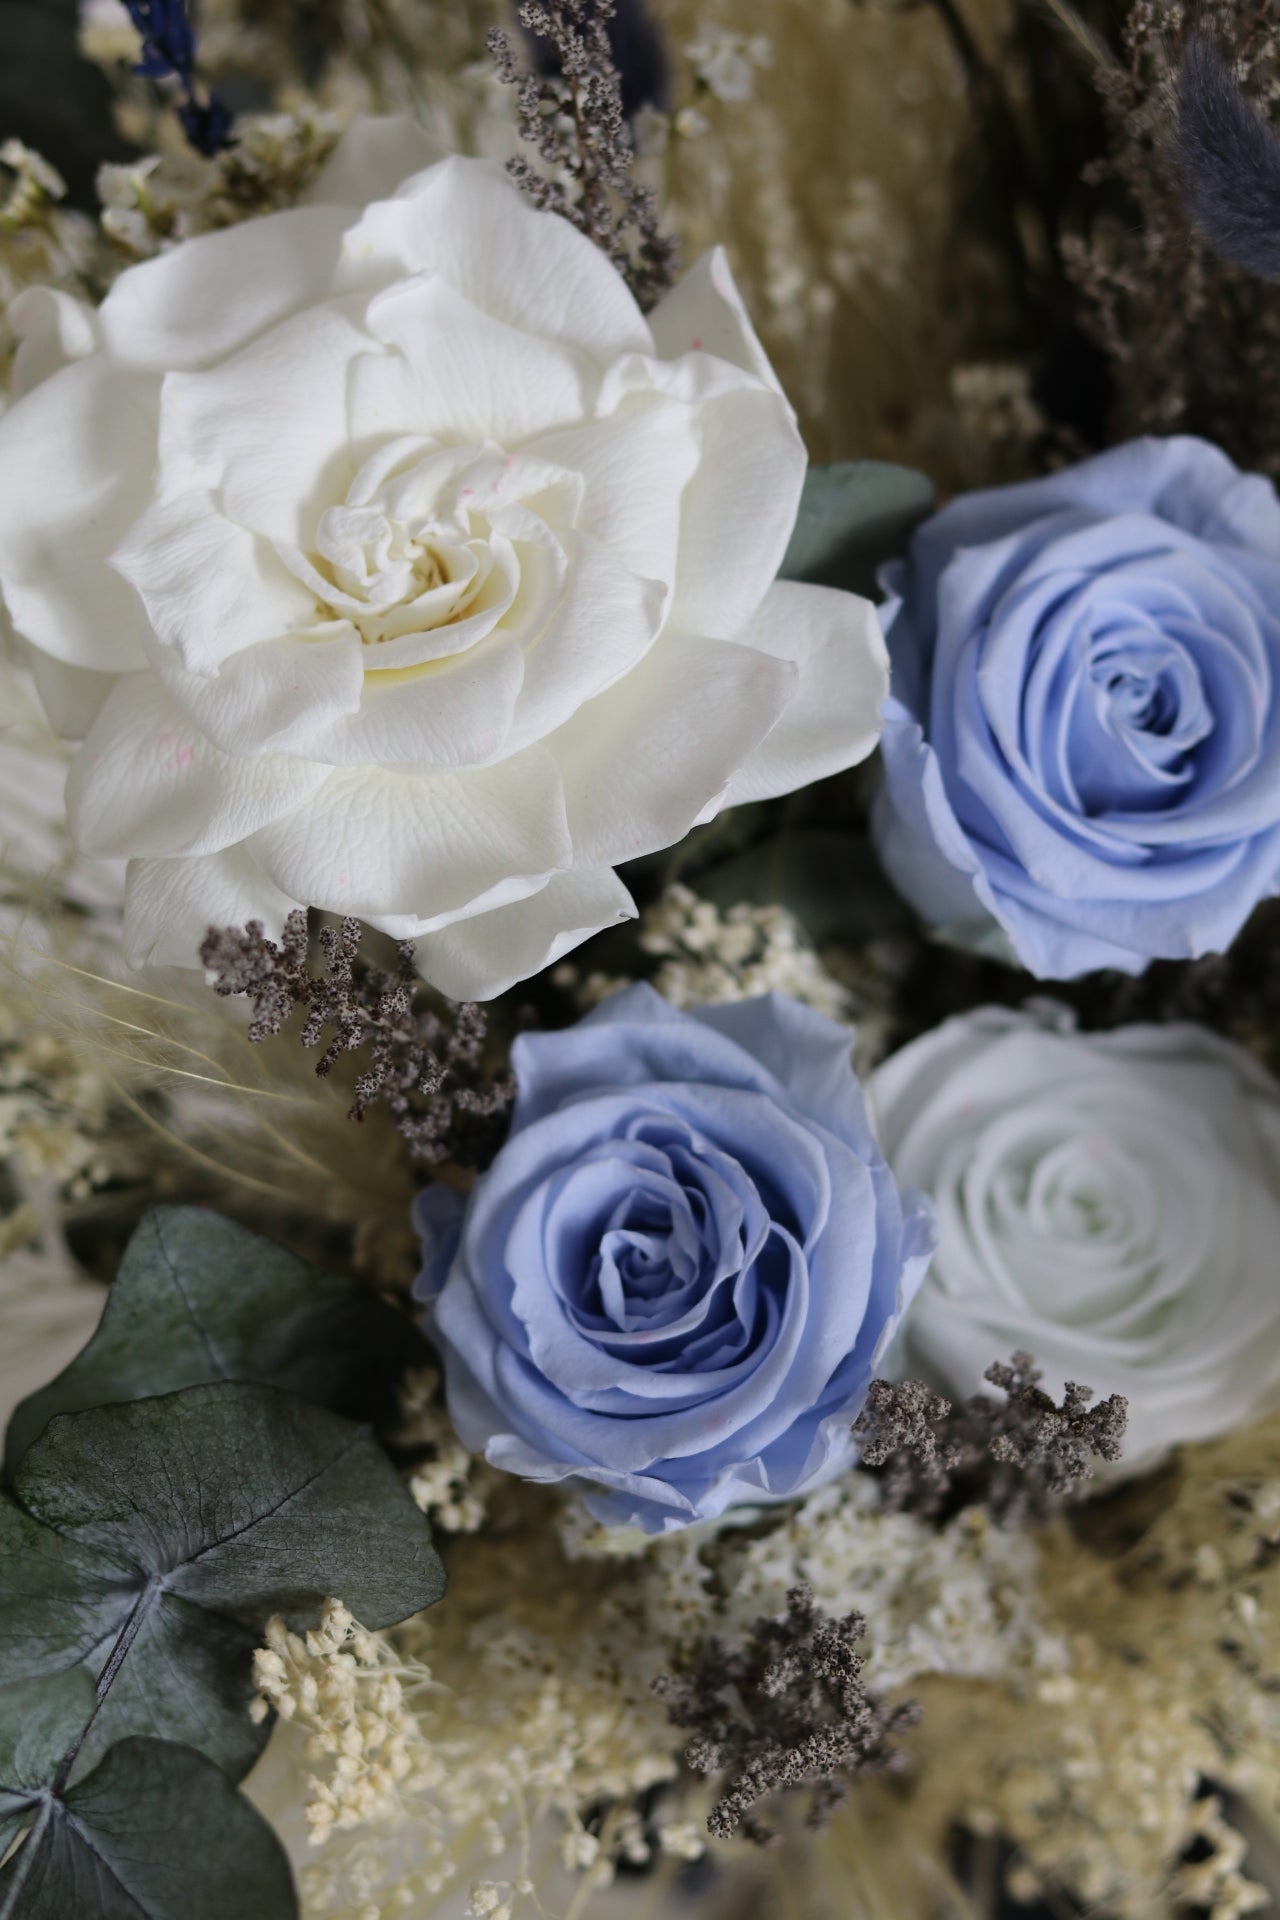 Everblooms -  Rose Collection - Cammie Premium Rose Bouquet (White/Light Blue Tone)